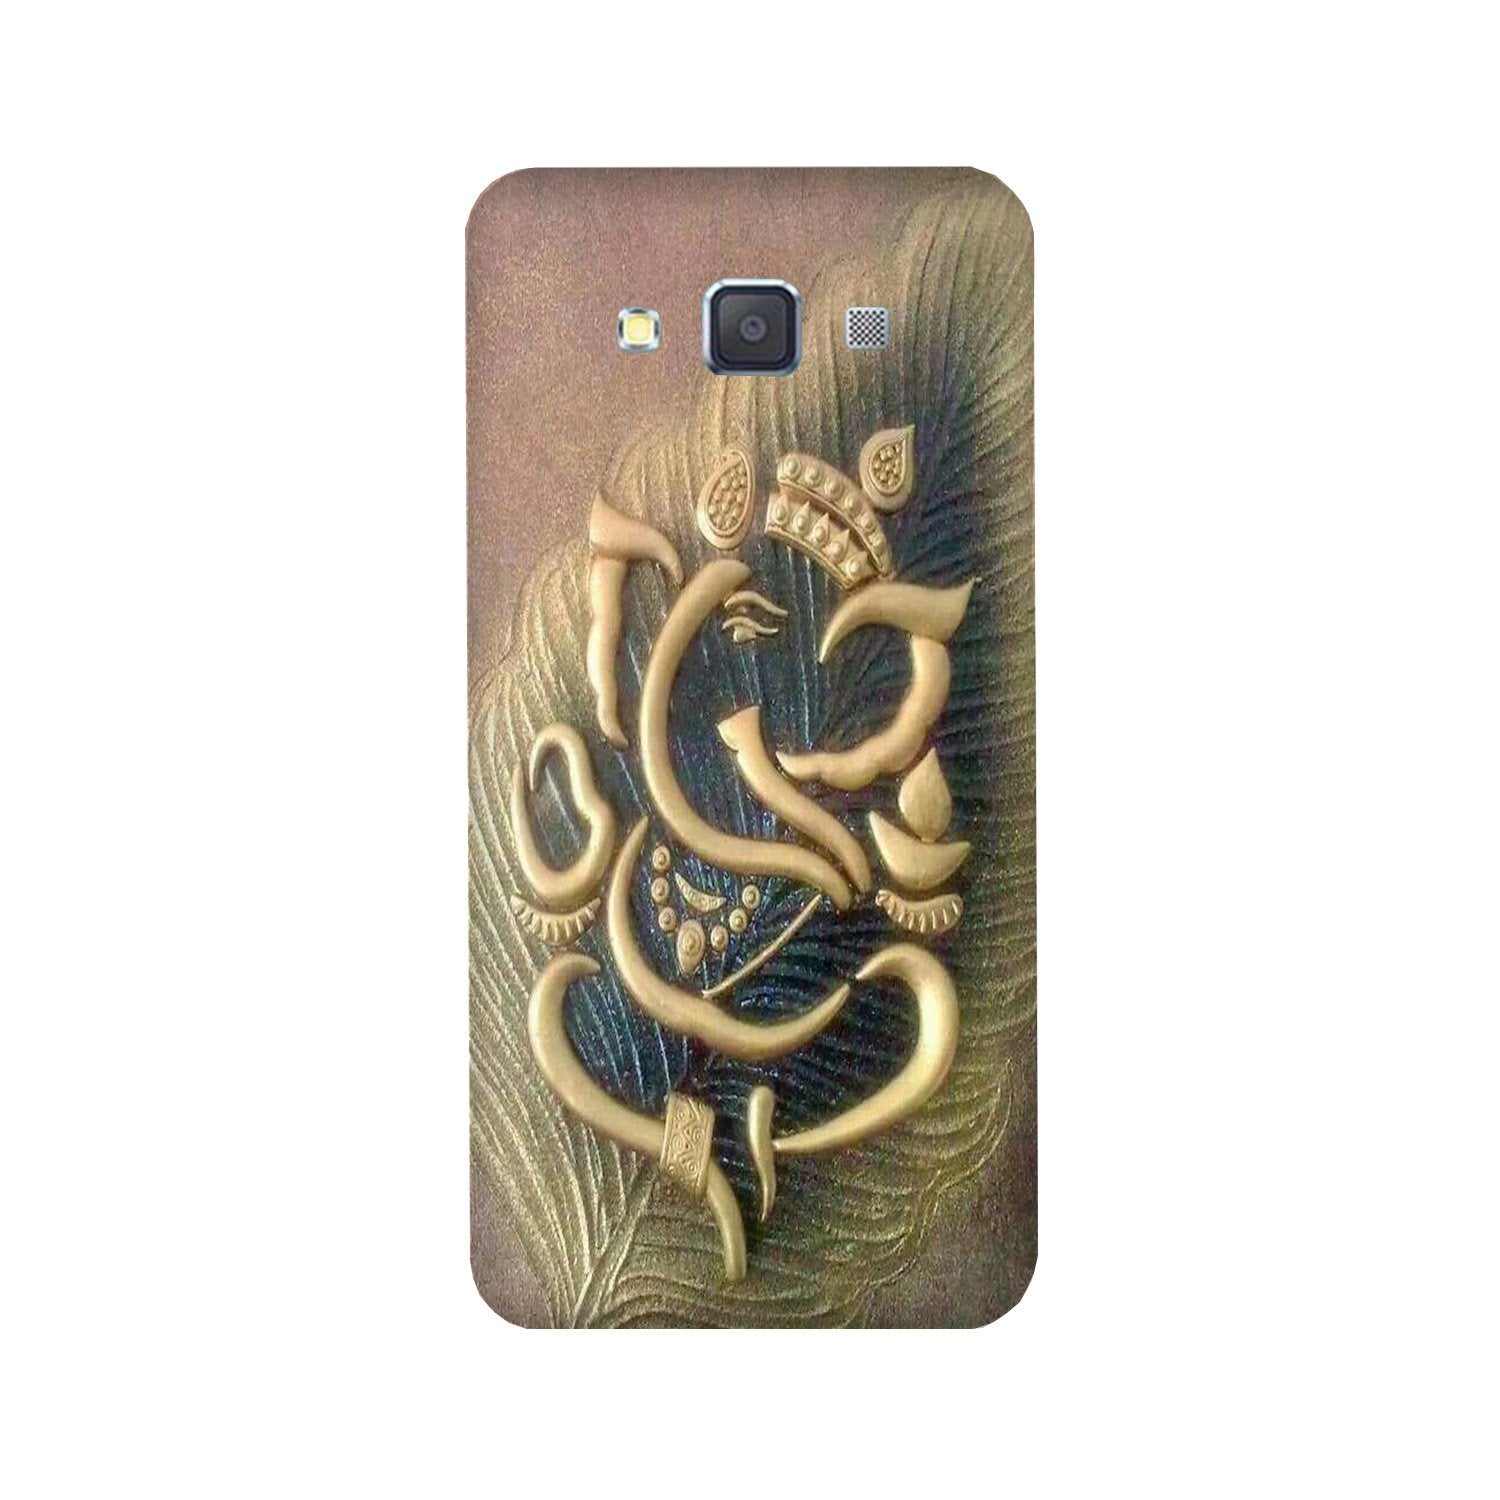 Lord Ganesha Case for Galaxy ON7/ON7 Pro